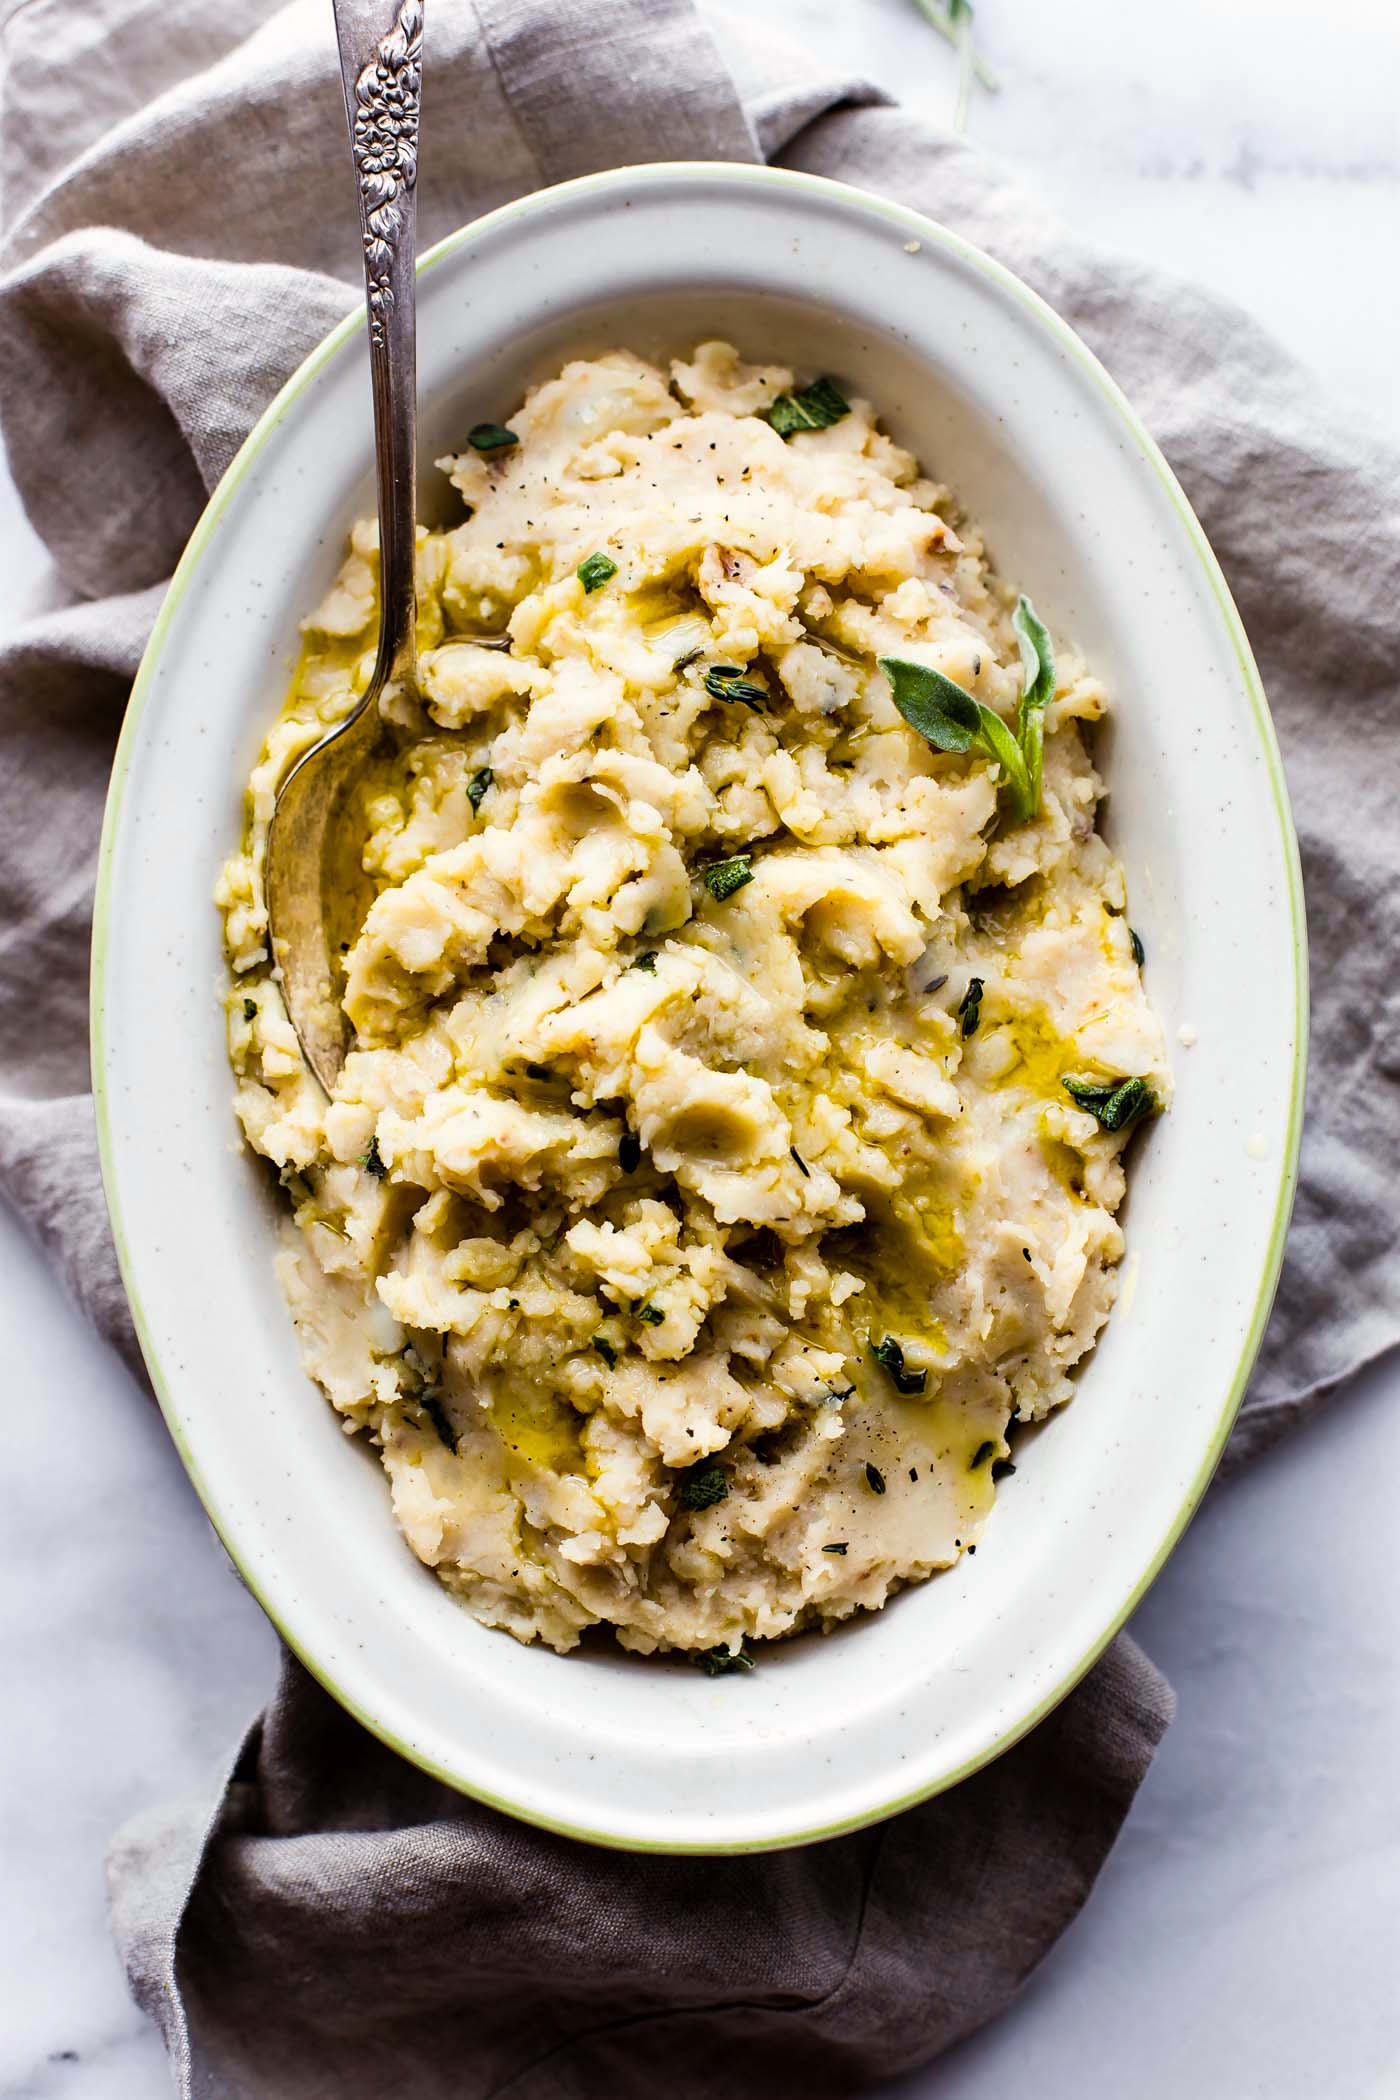 Slow cooker mashed potatoes with a creamy white bean and herb puree! These Vegan slow cooker mashed potatoes are so buttery and delicious, even without the butter! A simple, yet healthy, white bean sage puree is cooked right in to give it extra flavor and texture!. A vegan side dish that everyone will enjoy! 